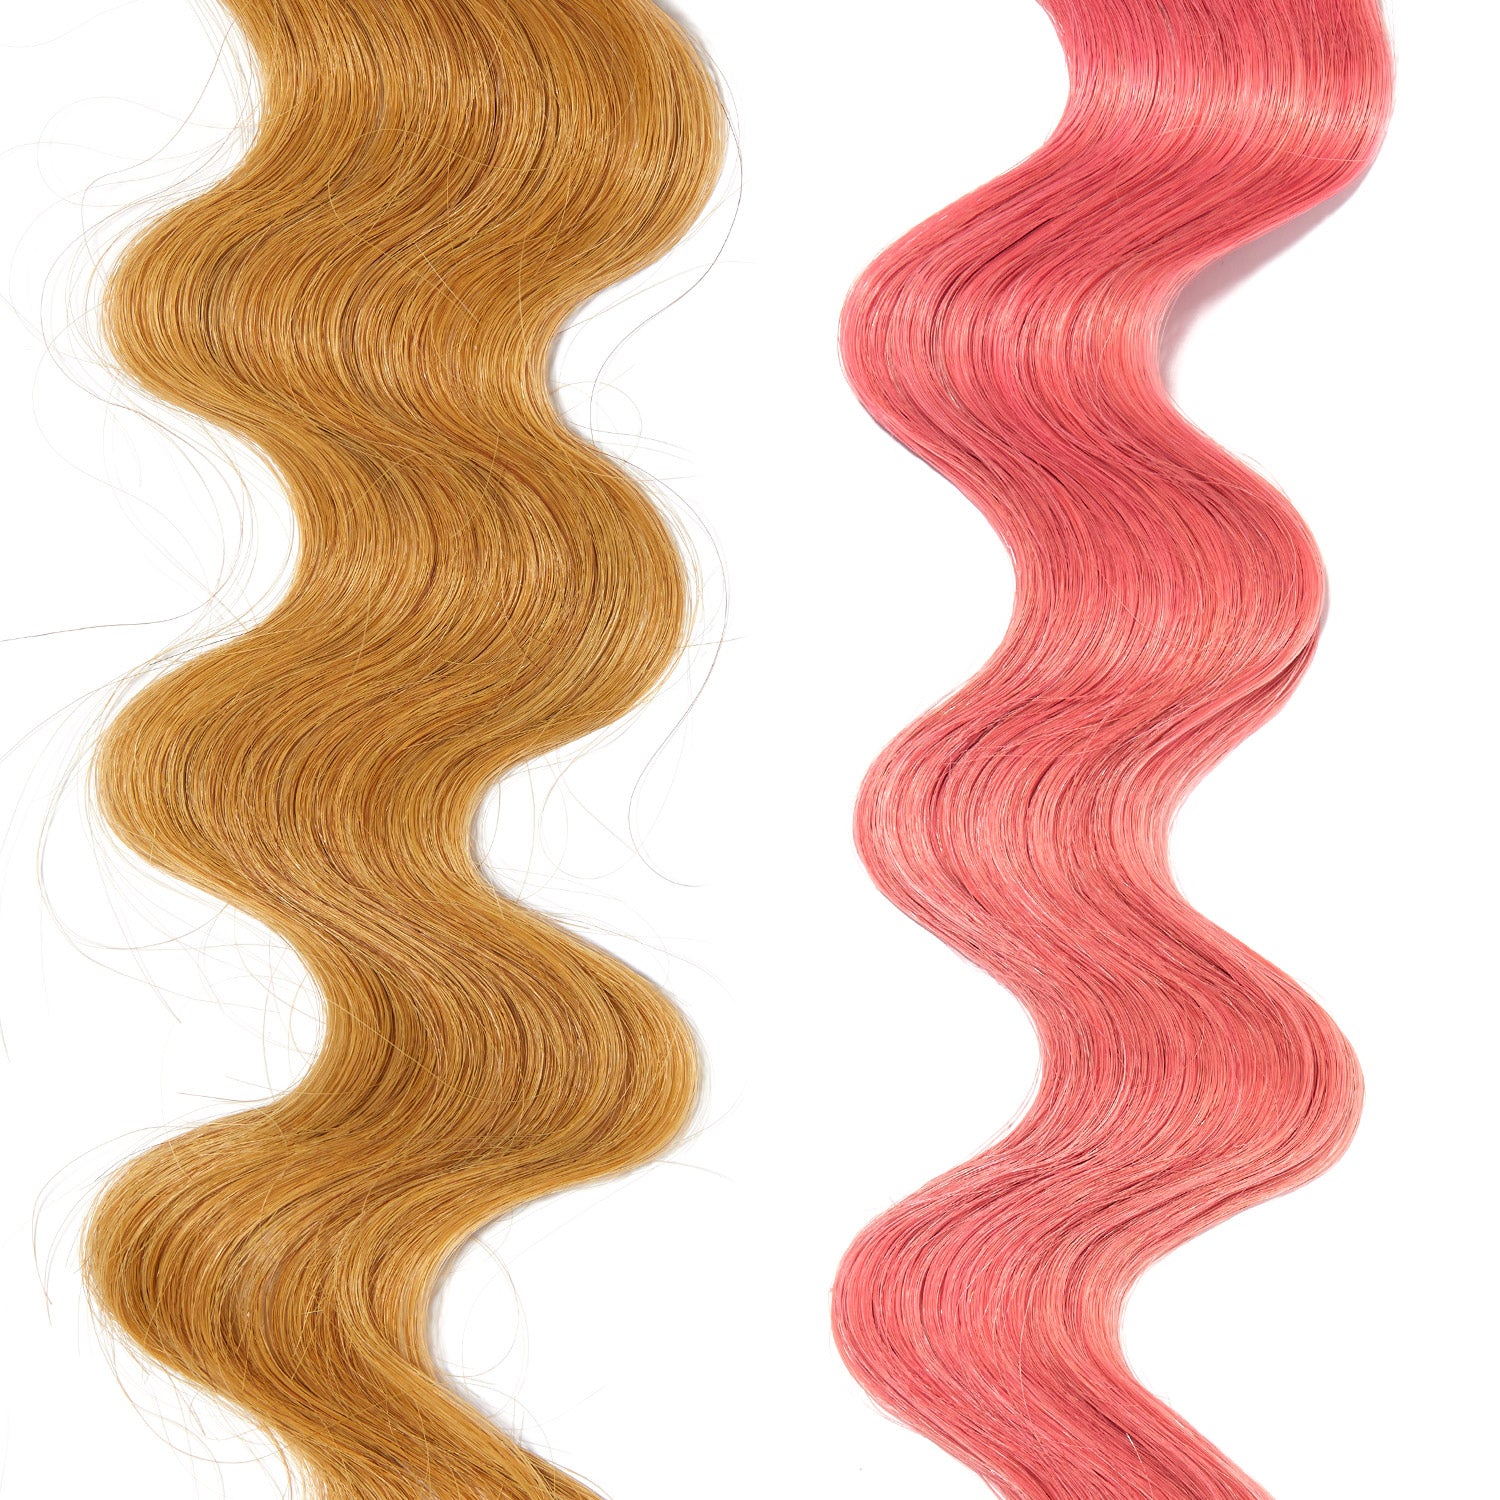 Rock The Locks Color Me Pink Hair Color & Conditioner, Hot Pink